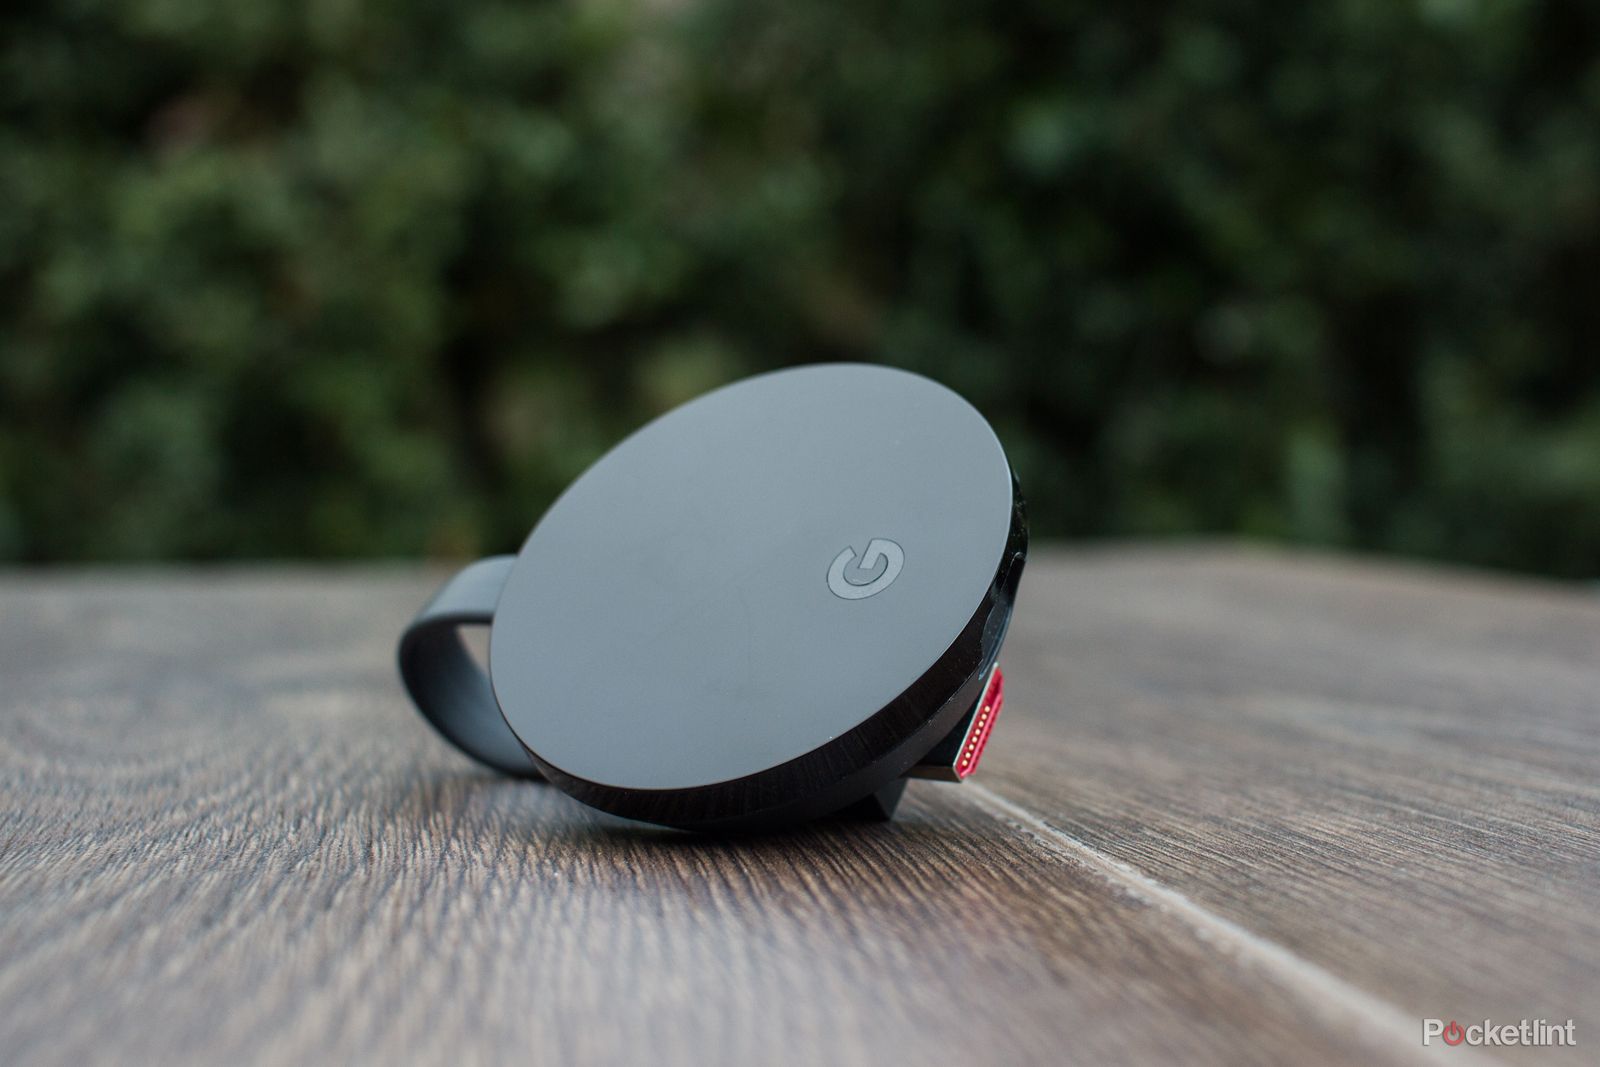 Chromecast Ultra delivers 4K and HDR content, but is that enough